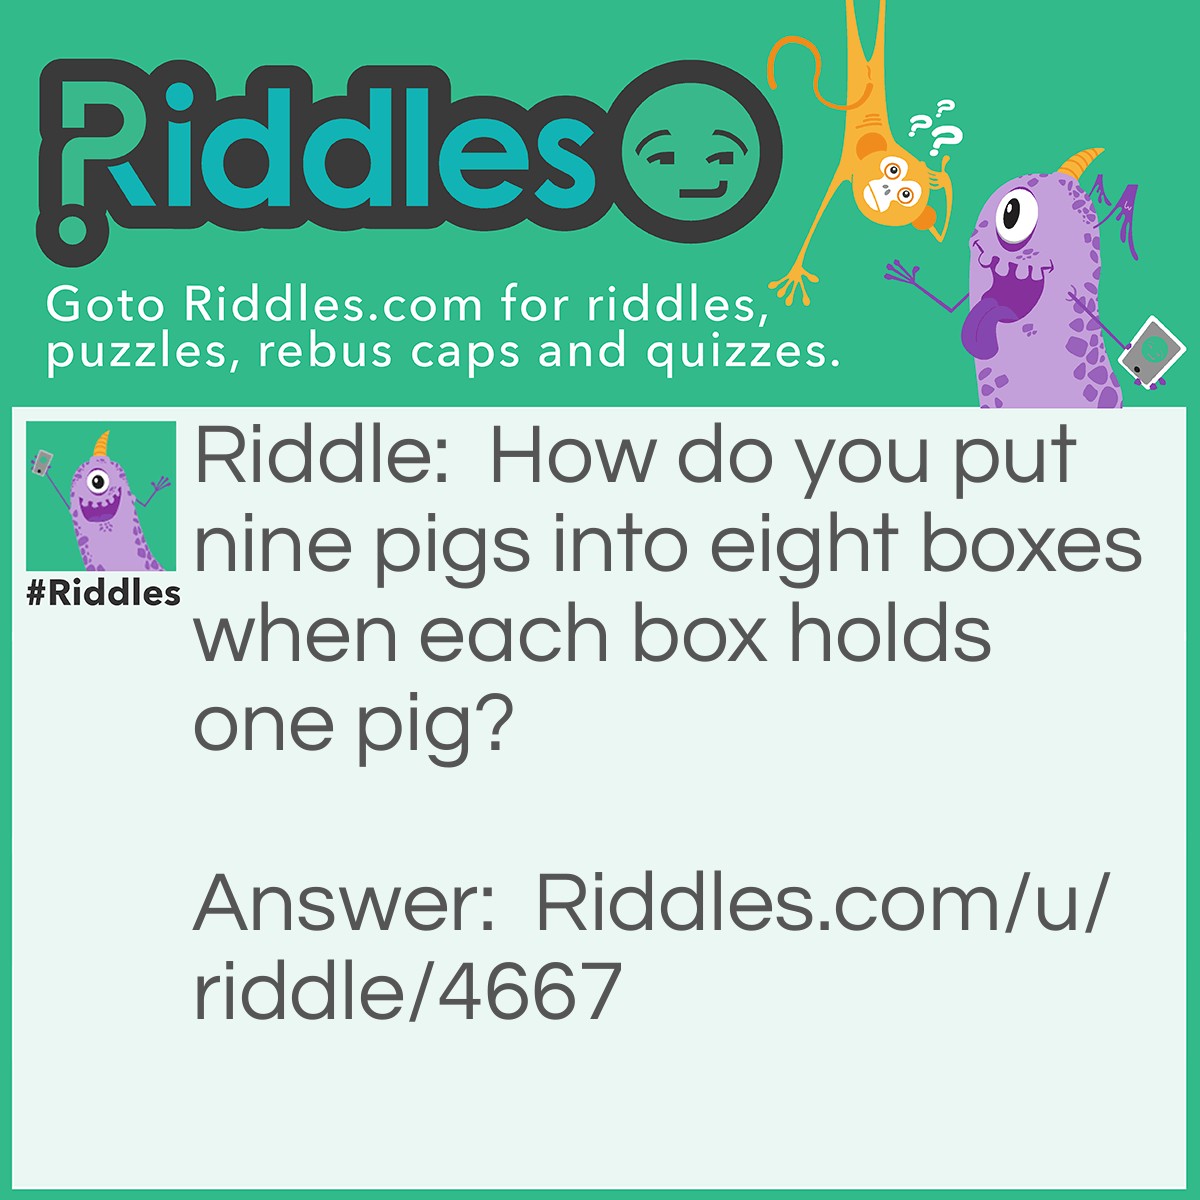 Riddle: How do you put nine pigs into eight boxes when each box holds one pig? Answer: You spell nine pigs in eight boxes.